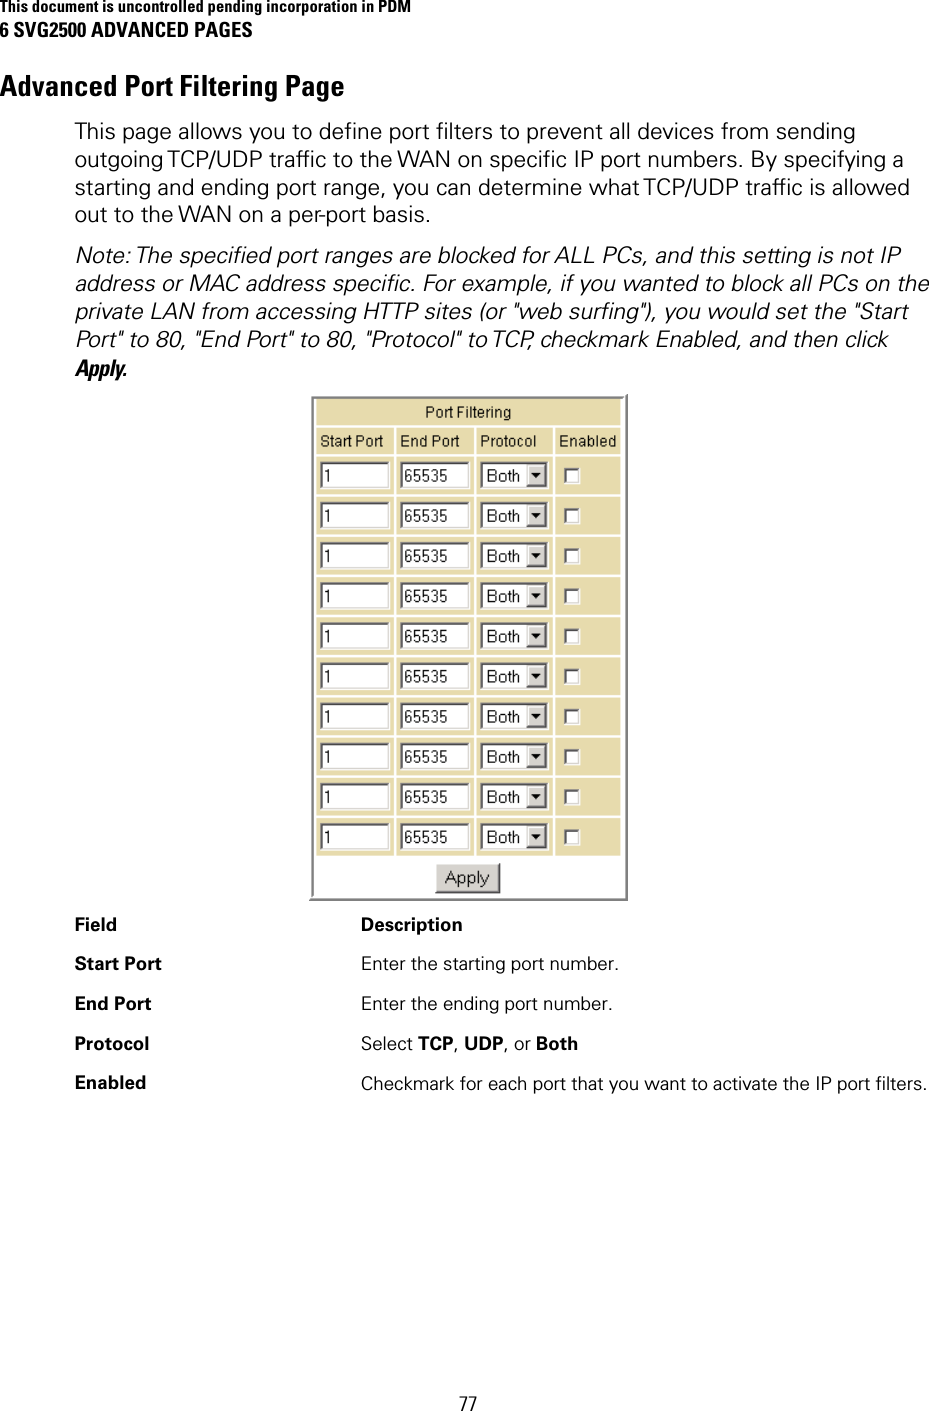 This document is uncontrolled pending incorporation in PDM 6 SVG2500 ADVANCED PAGES  77 Advanced Port Filtering Page This page allows you to define port filters to prevent all devices from sending outgoing TCP/UDP traffic to the WAN on specific IP port numbers. By specifying a starting and ending port range, you can determine what TCP/UDP traffic is allowed out to the WAN on a per-port basis. Note: The specified port ranges are blocked for ALL PCs, and this setting is not IP address or MAC address specific. For example, if you wanted to block all PCs on the private LAN from accessing HTTP sites (or &quot;web surfing&quot;), you would set the &quot;Start Port&quot; to 80, &quot;End Port&quot; to 80, &quot;Protocol&quot; to TCP, checkmark Enabled, and then click Apply.  Field   Description Start Port  Enter the starting port number. End Port  Enter the ending port number. Protocol  Select TCP, UDP, or Both Enabled  Checkmark for each port that you want to activate the IP port filters.  